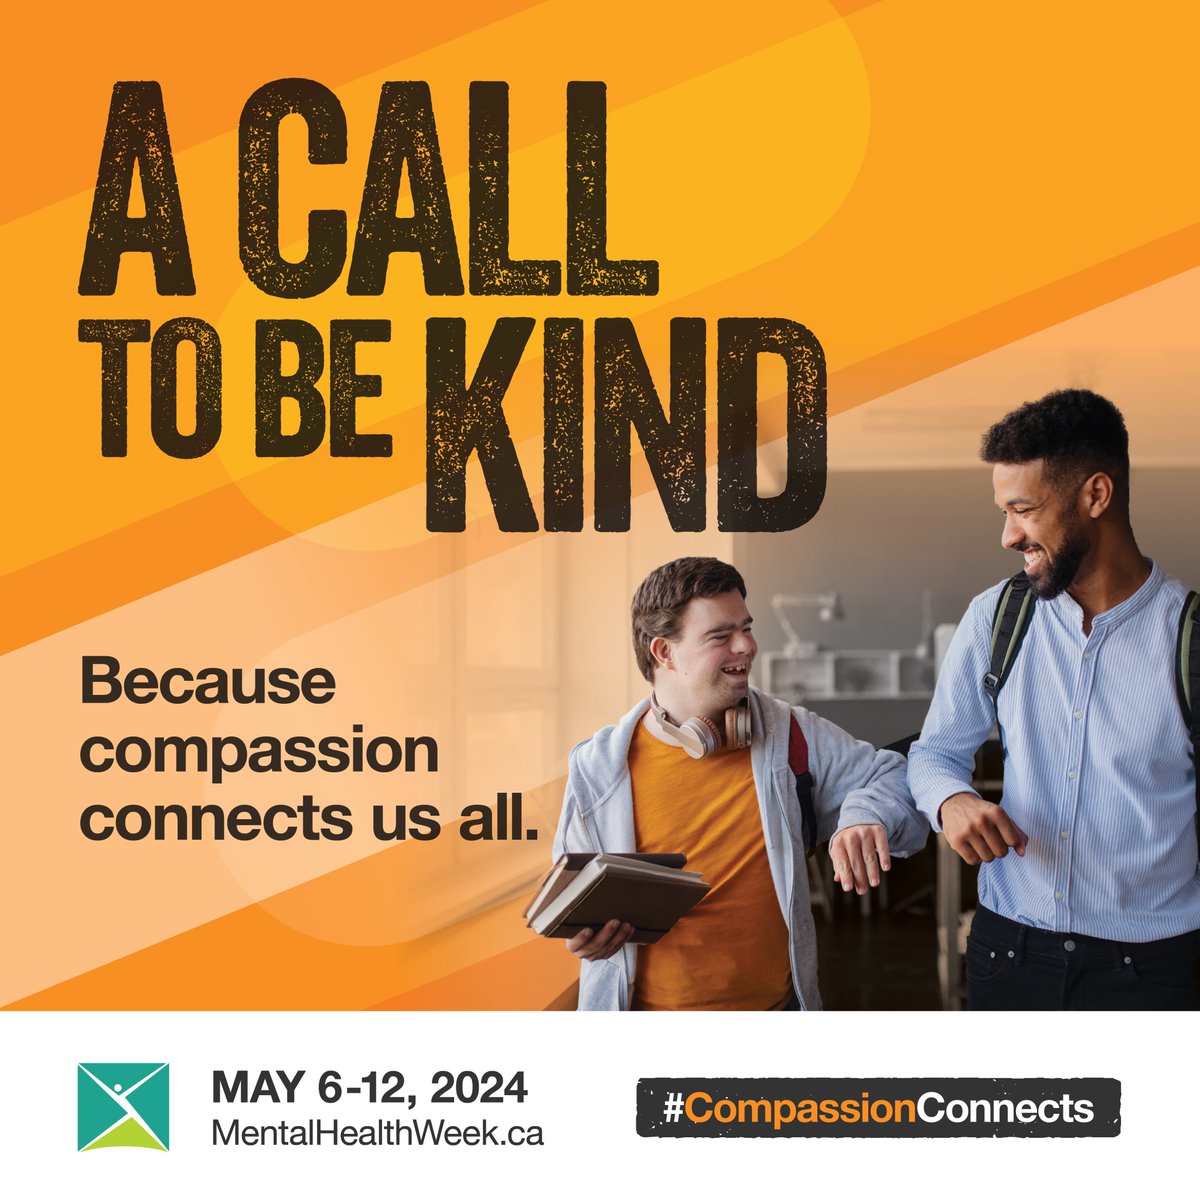 May 6-12 is CMHA “Mental Health Week”. Visit the link below for information and resources to help you show your support for this important week.

Link: bit.ly/40RiB3I
#CompassionConnects #MentalHealthWeek #AcceptingTheChallenge #BSDSchools #Brandon #BrandonMB #BdnMB